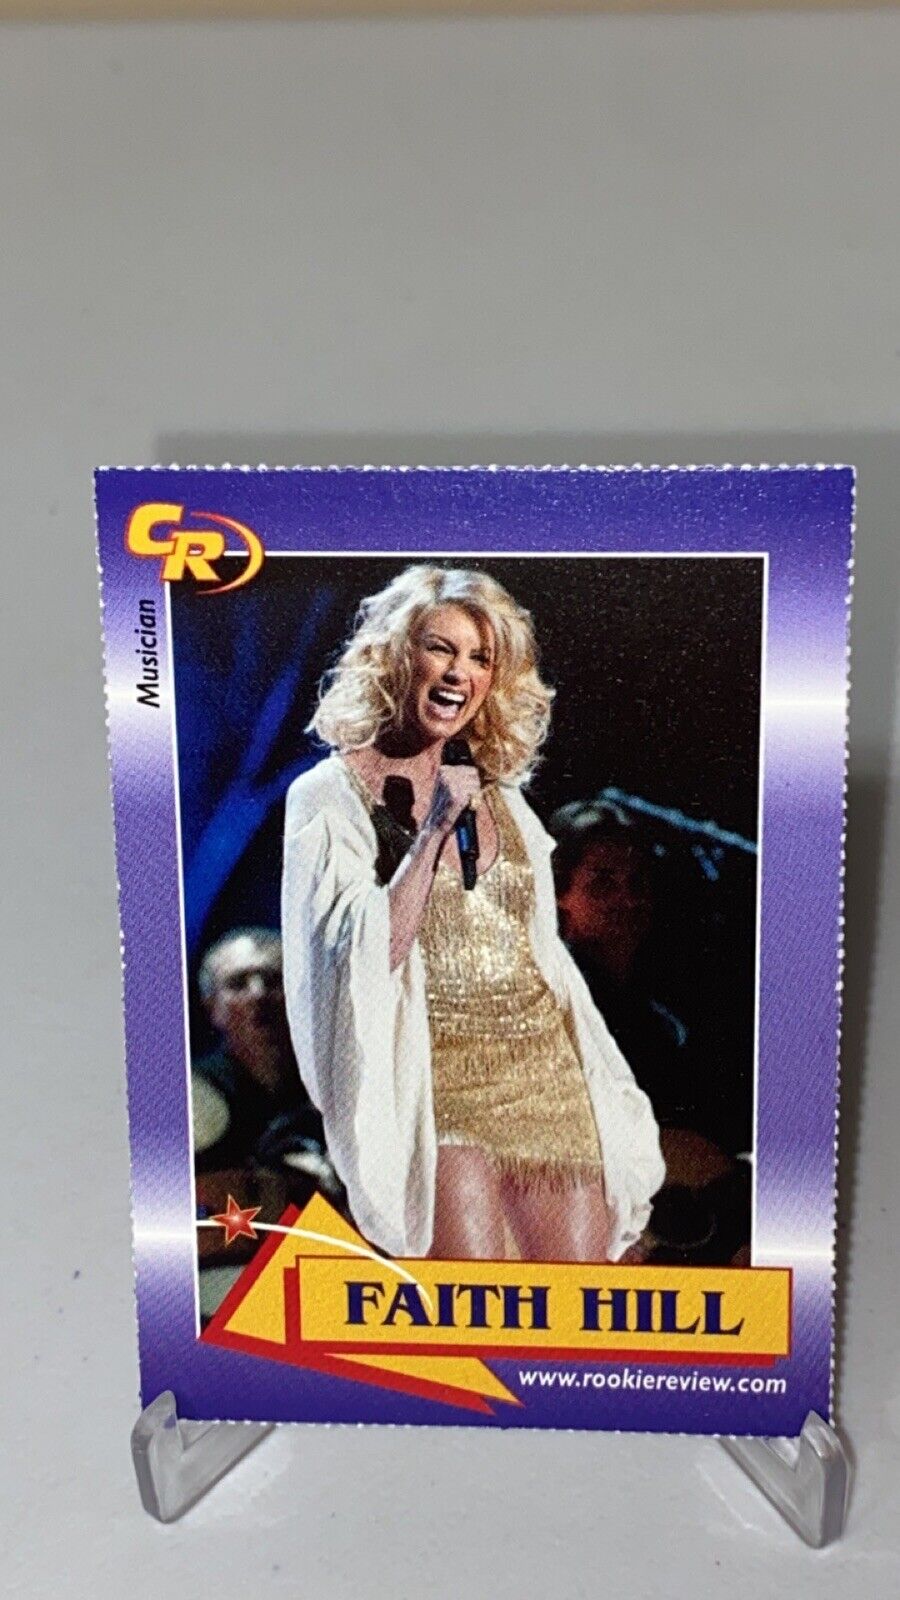 2003 Celebrity Review Rookie Review Faith Hill Country Musician Card #4